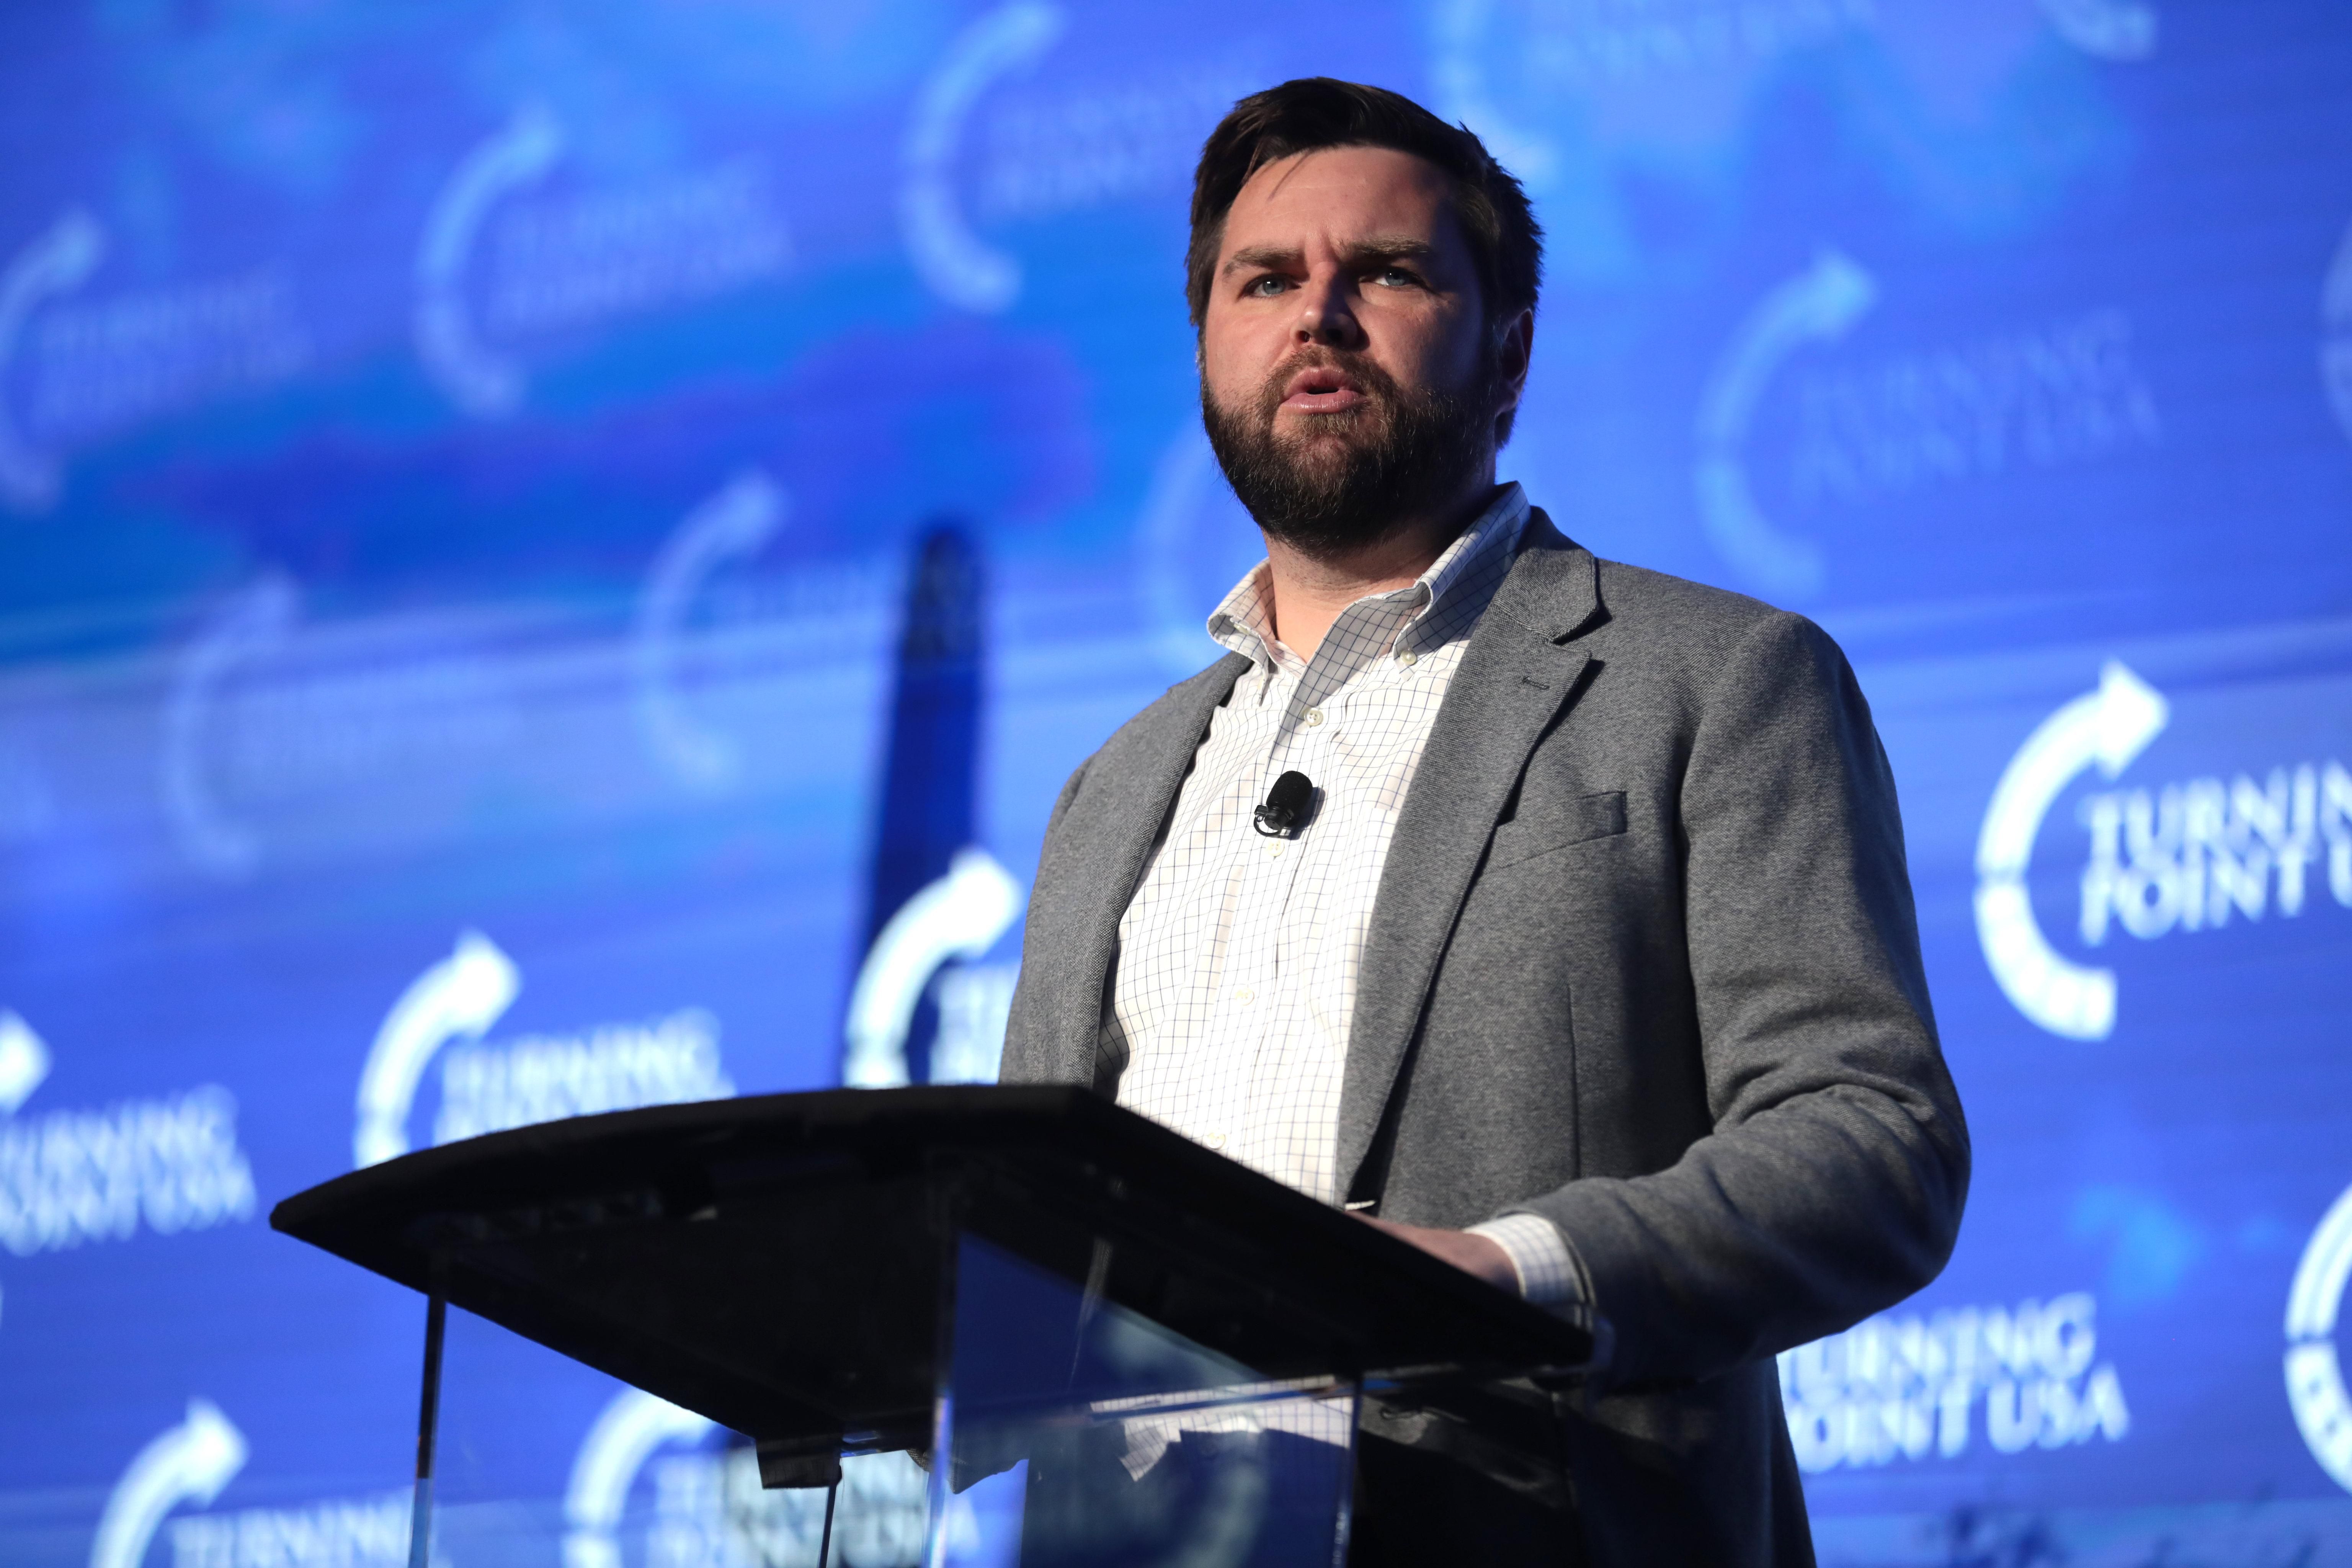 J. D. Vance, a U.S. Senate candidate from Ohio, speaks at the Southwest Regional Conference hosted by Turning Point USA on April 17, 2021